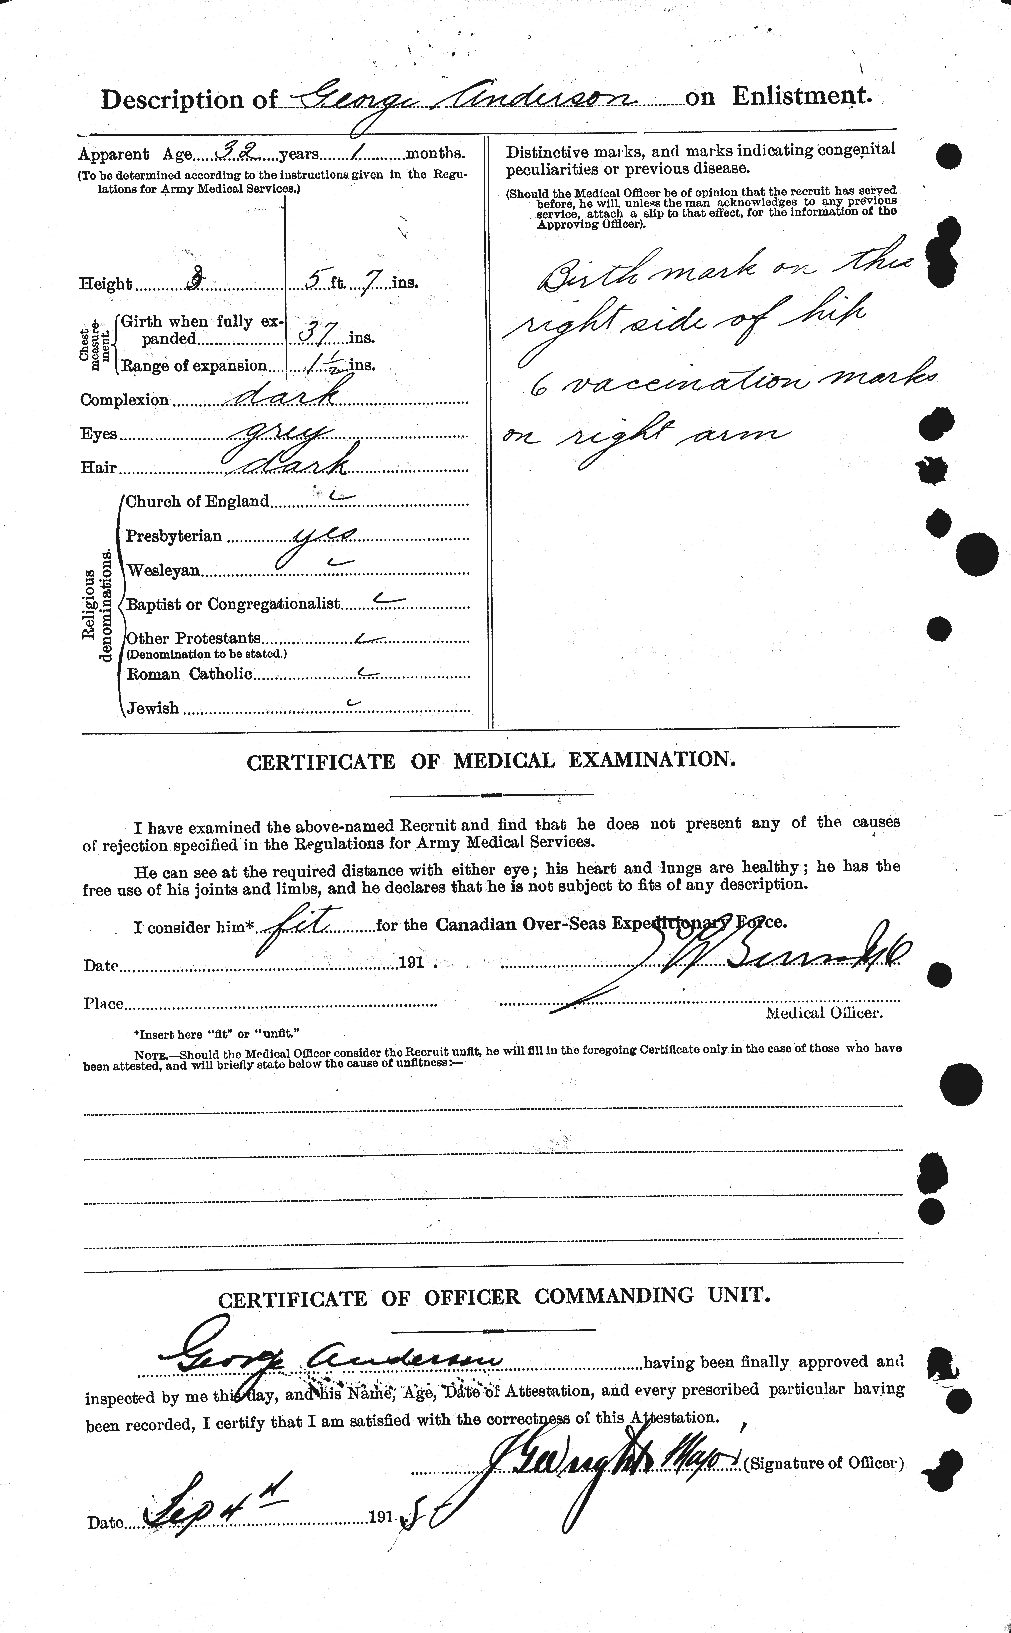 Personnel Records of the First World War - CEF 209785b